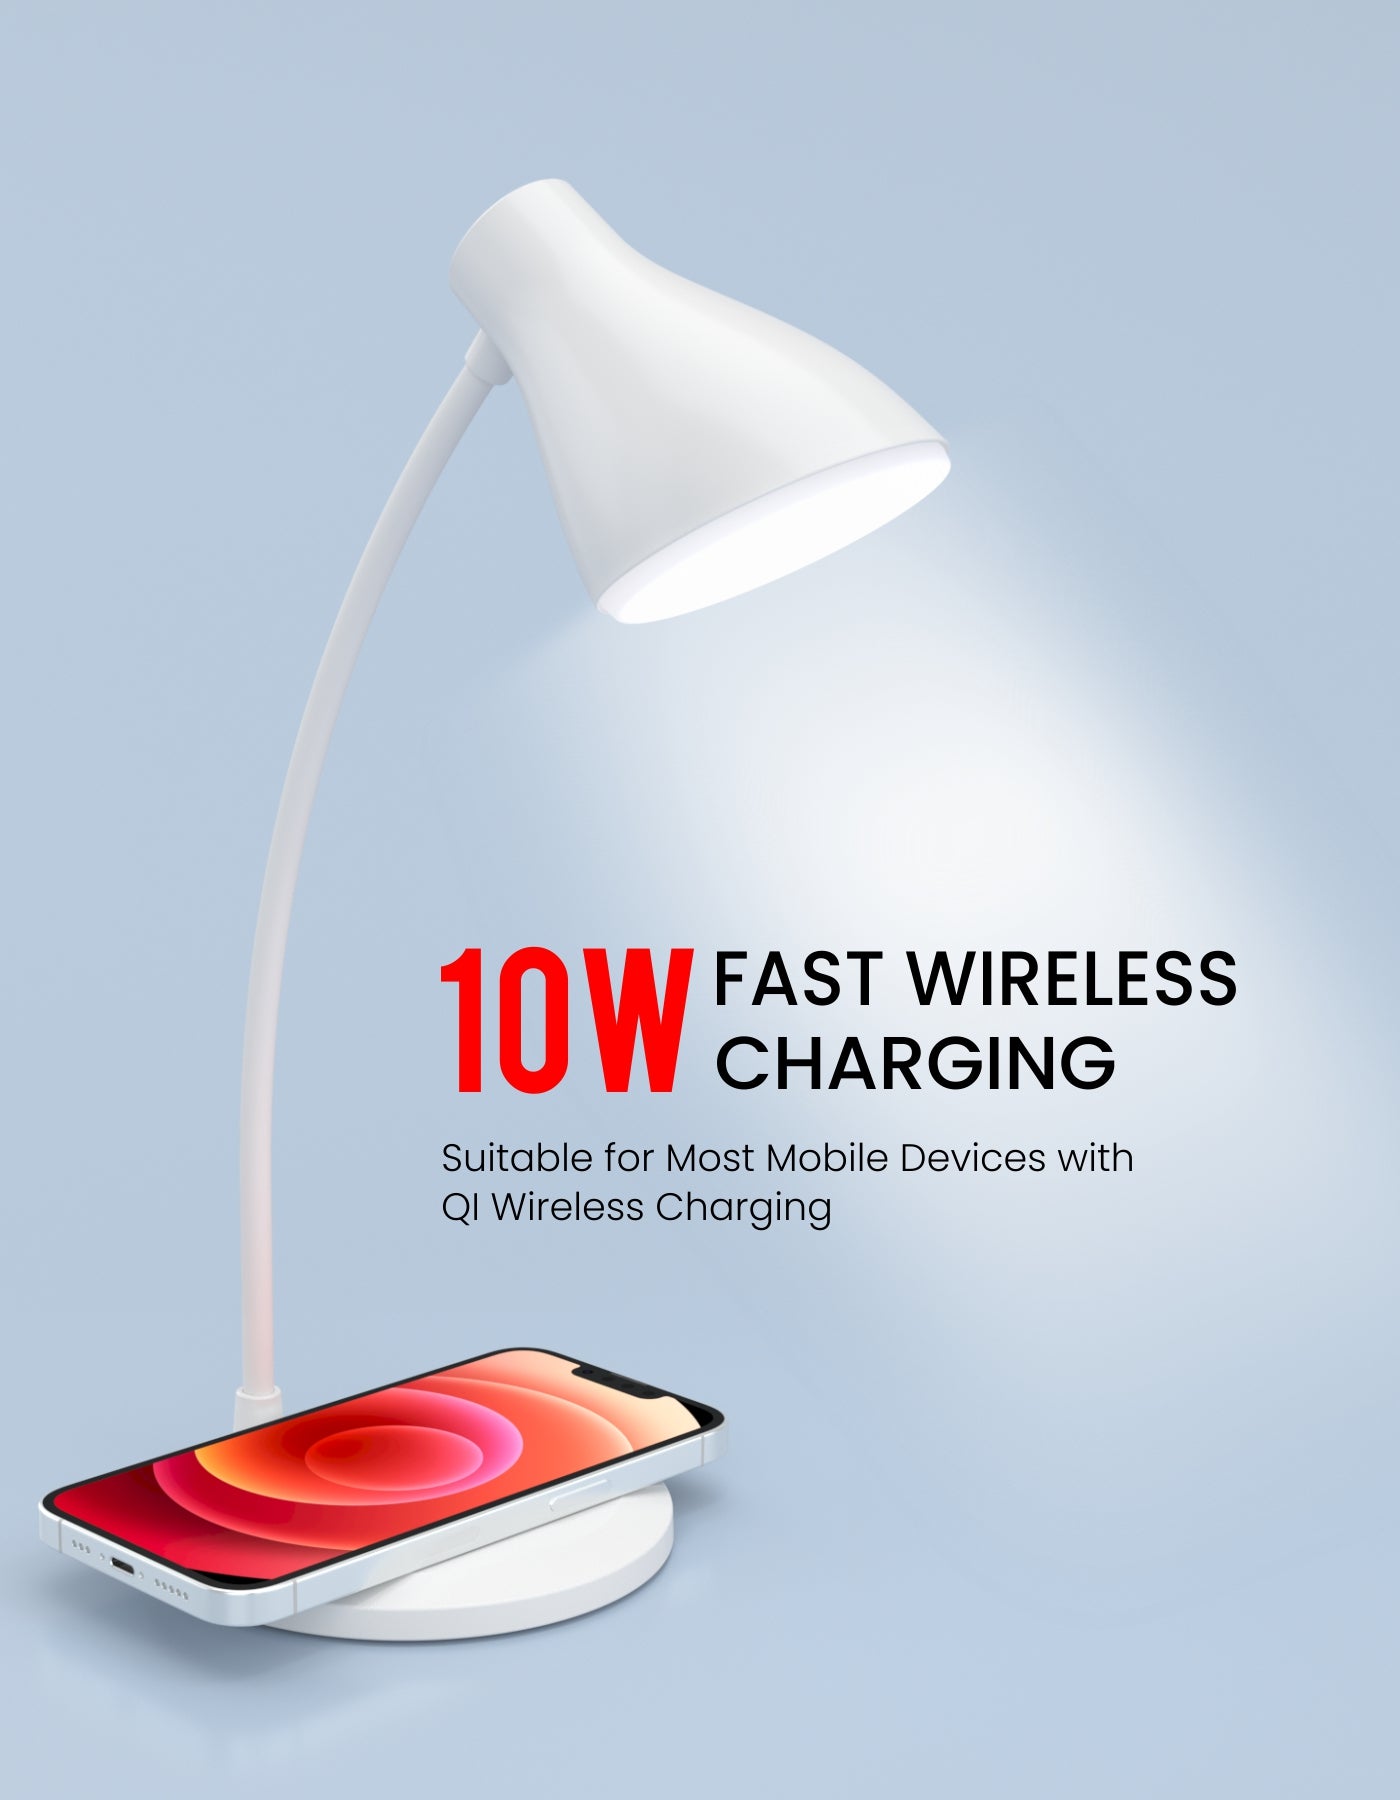 Brillo 3 - 2-in-1 Wireless Charger Lamp With 10W Wireless Fast Charger